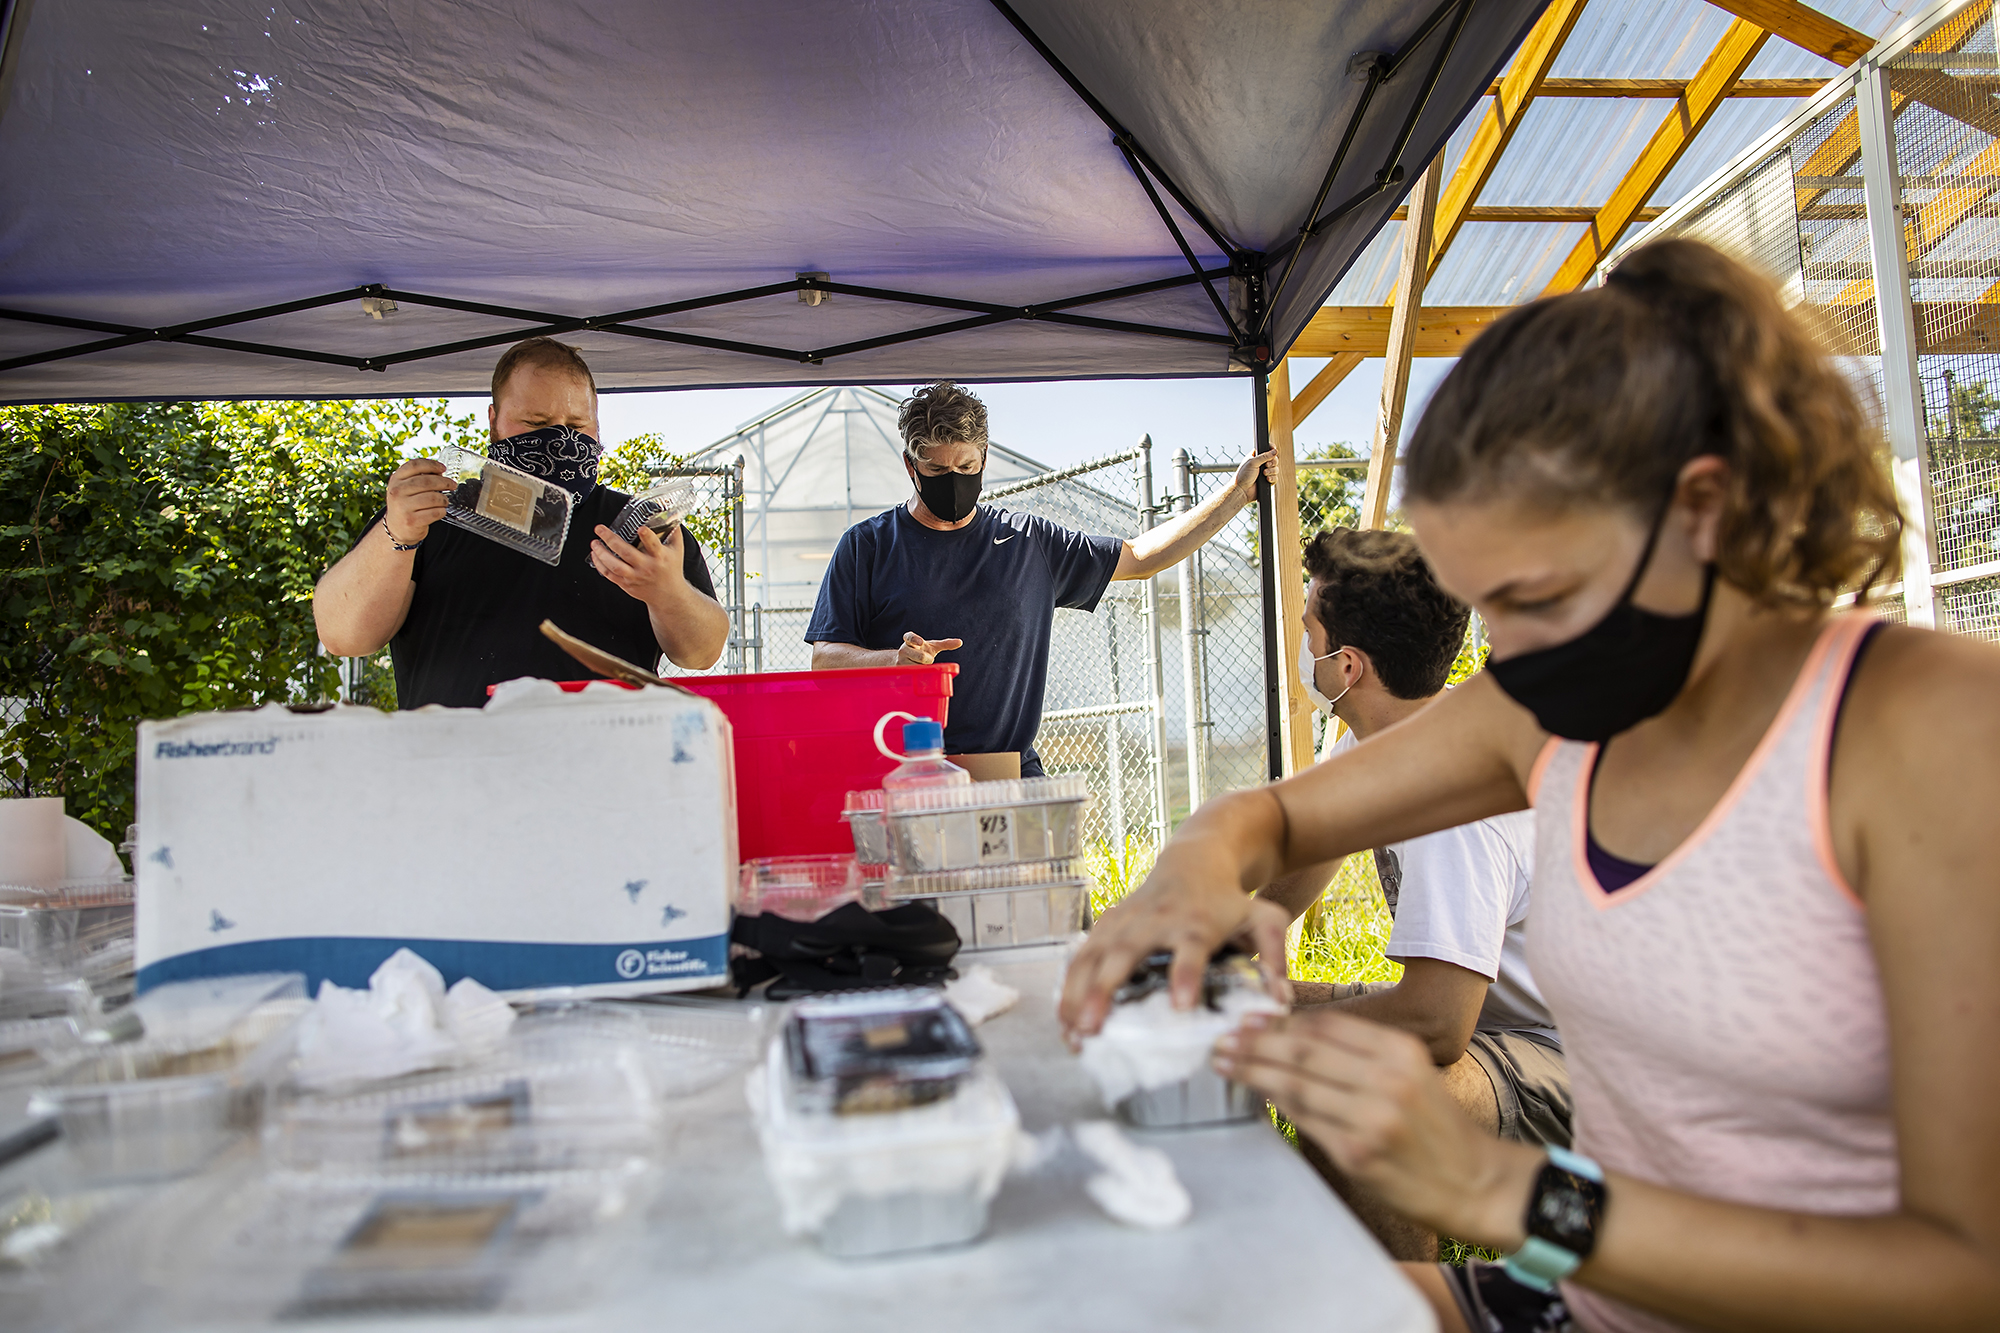 Scientists process boxes containing fruit flies under a tent at a field site